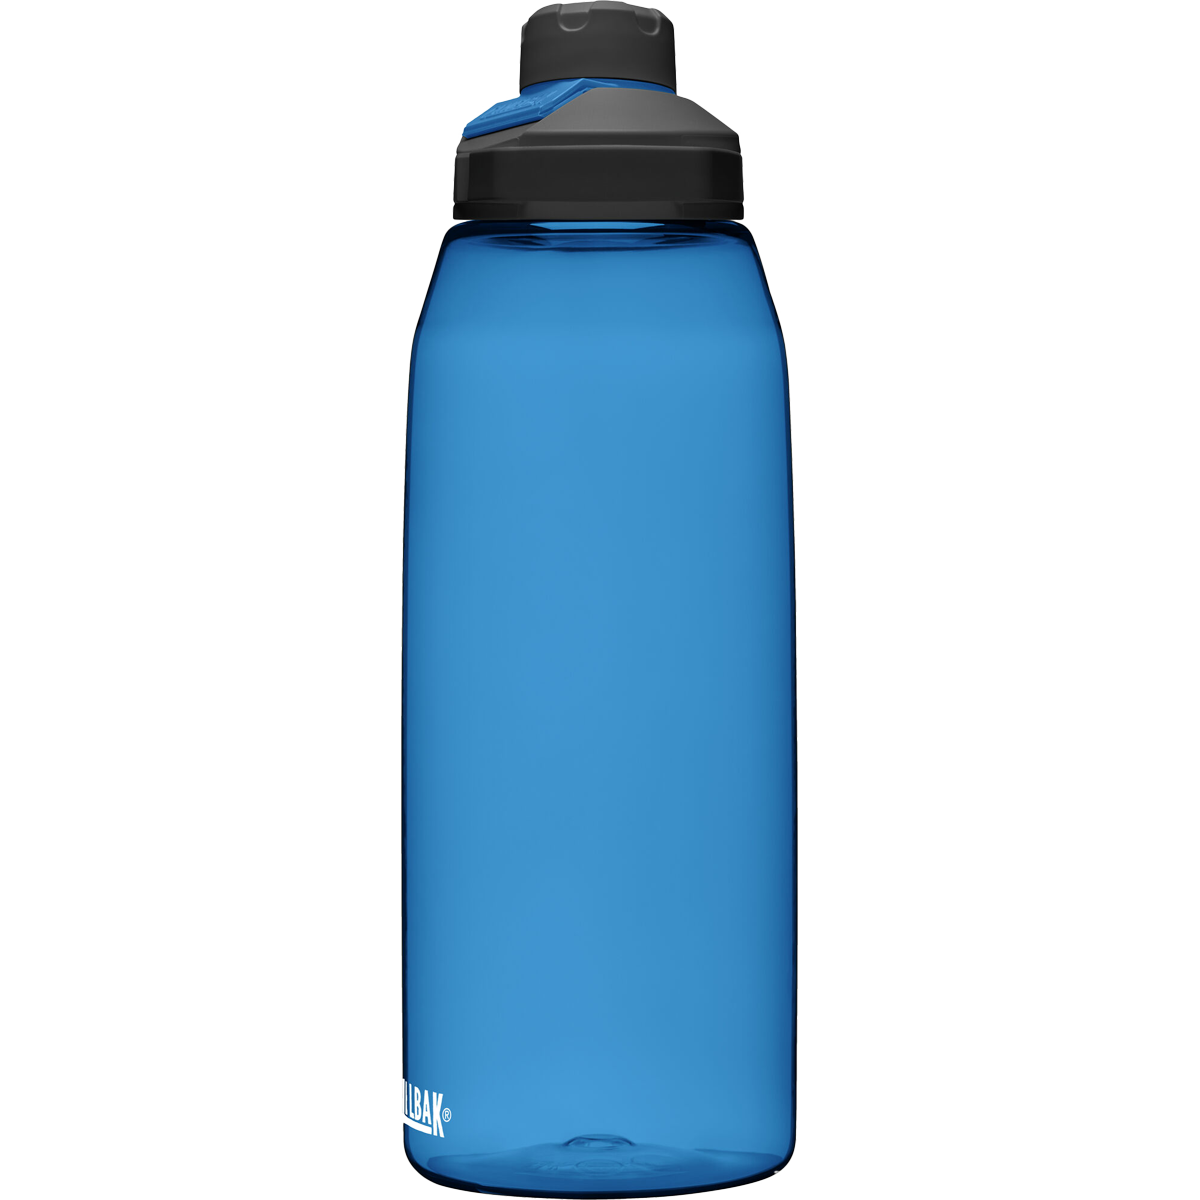 50oz Sport Water Bottle Best for High Capacity Hydration Clear Tritan Plastic 